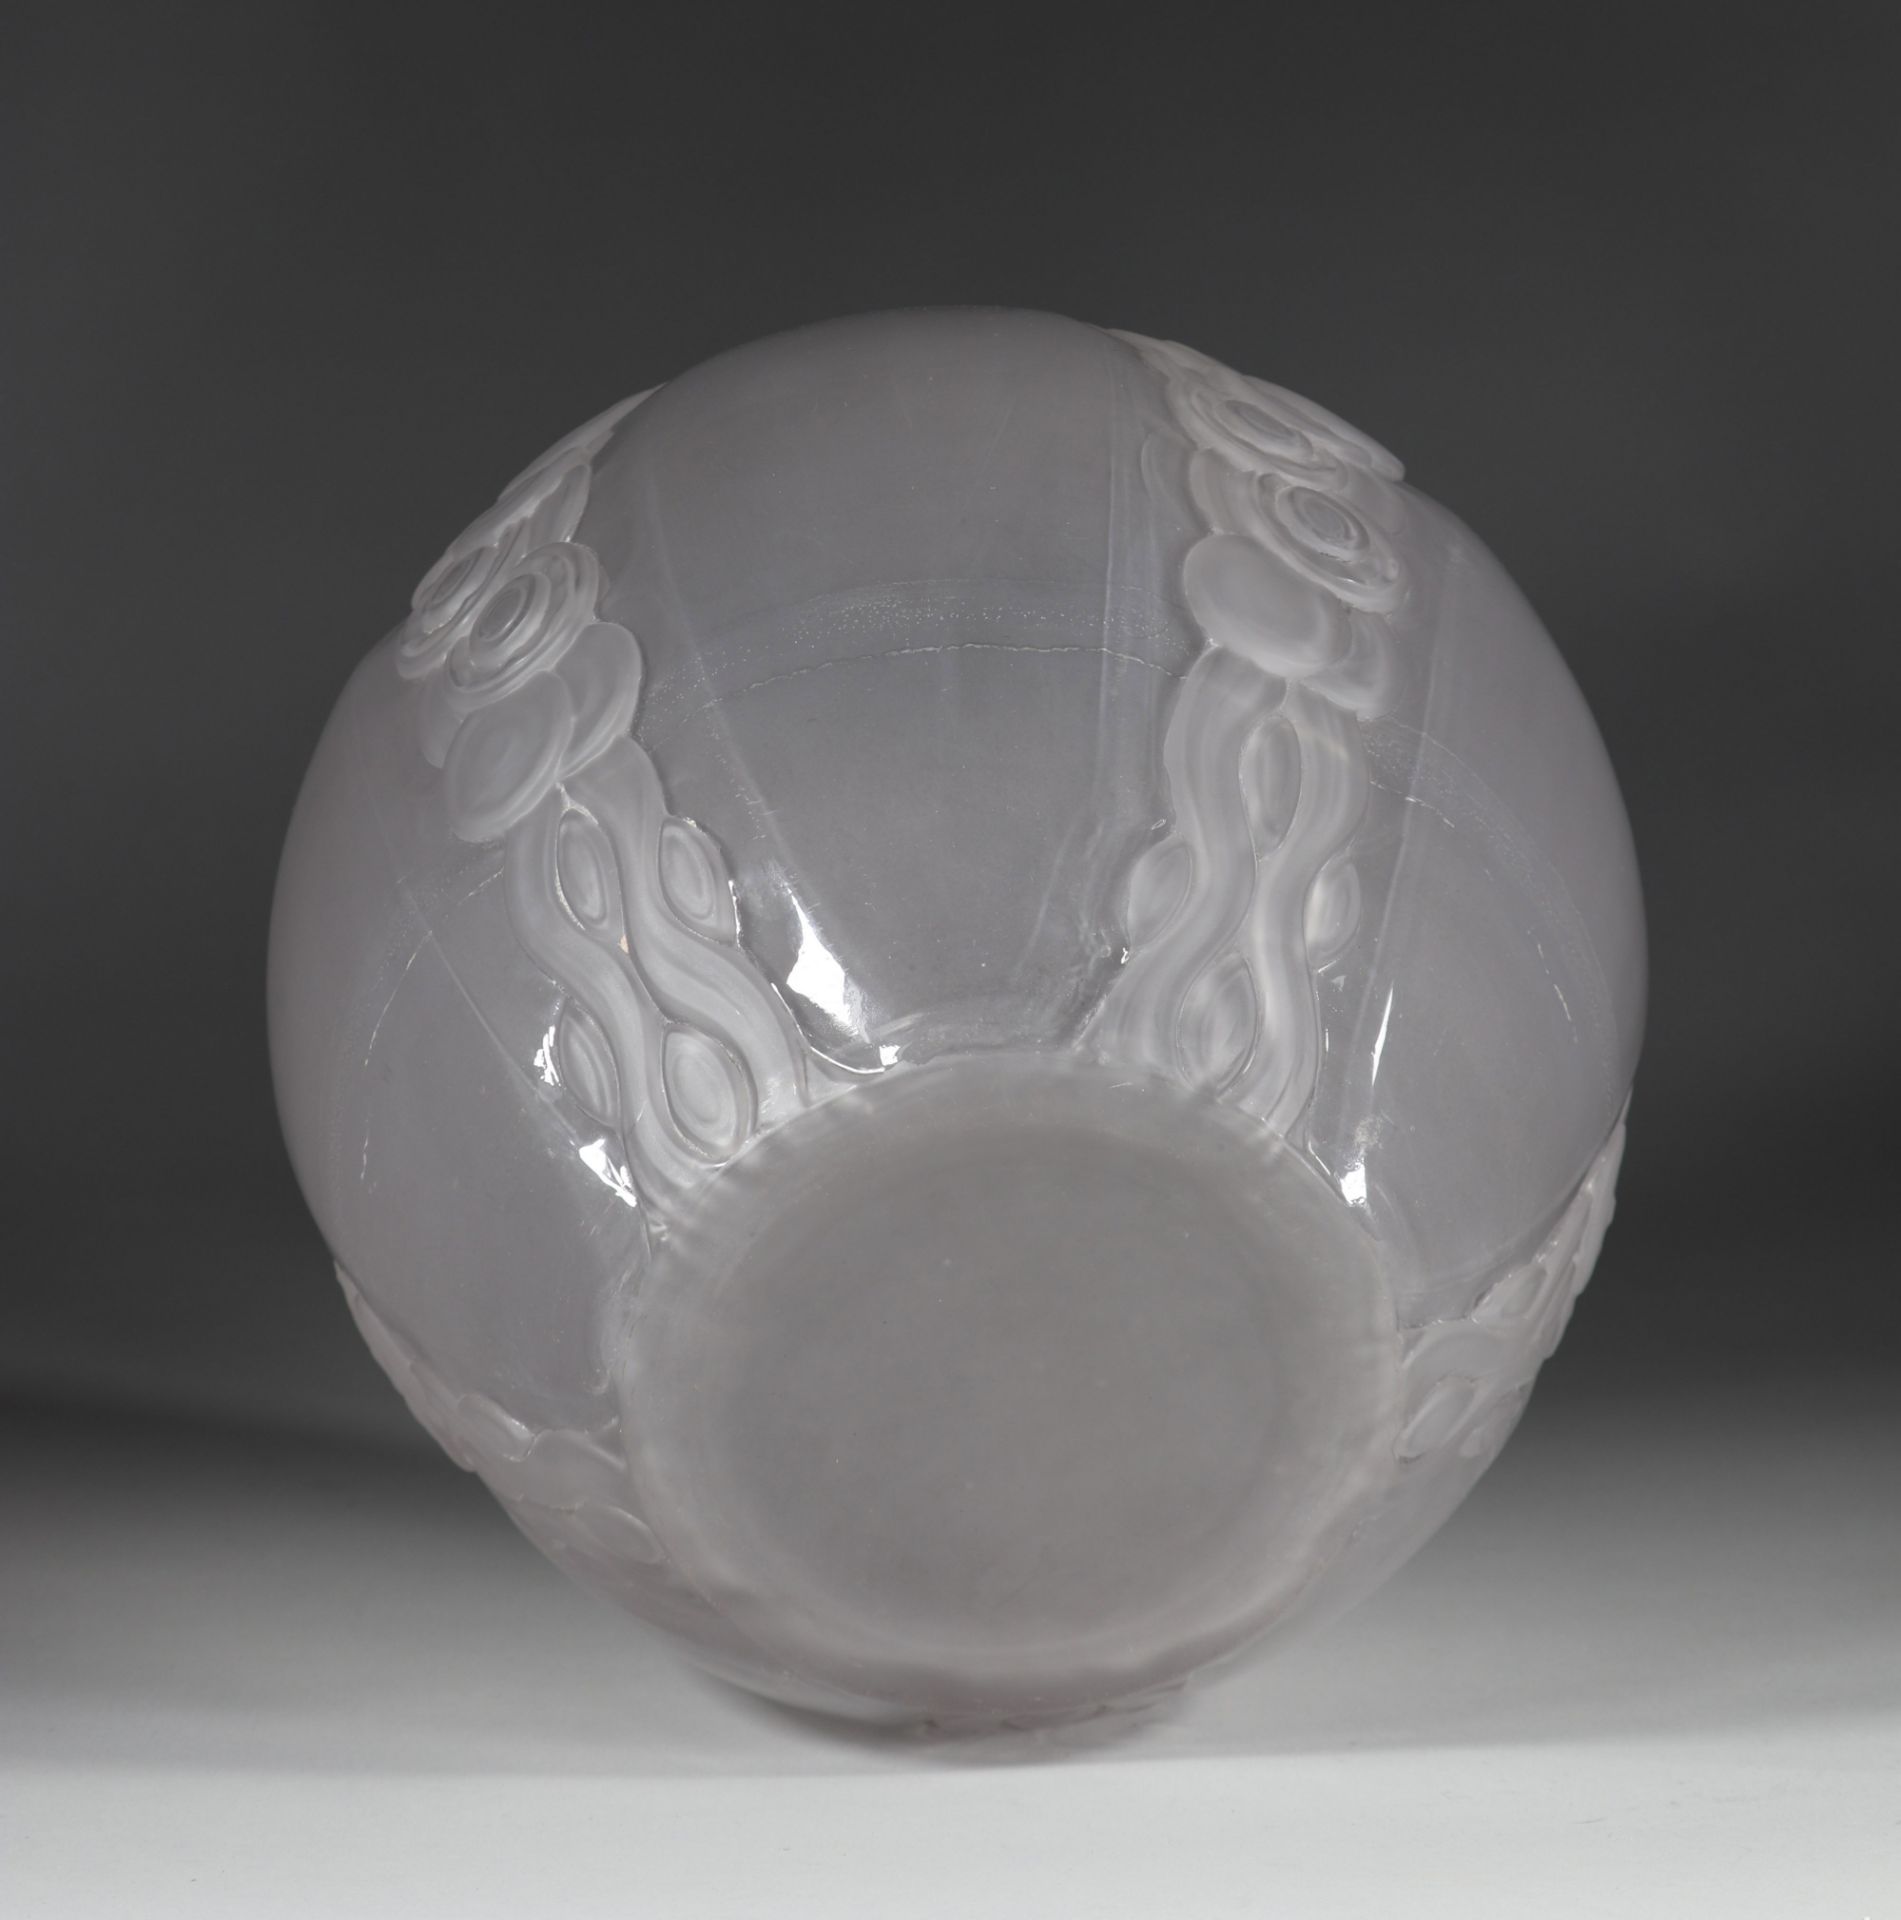 Andre HUNEBELLE imposing ovoid glass vase with a garland of falling stylized flowers - Image 5 of 6